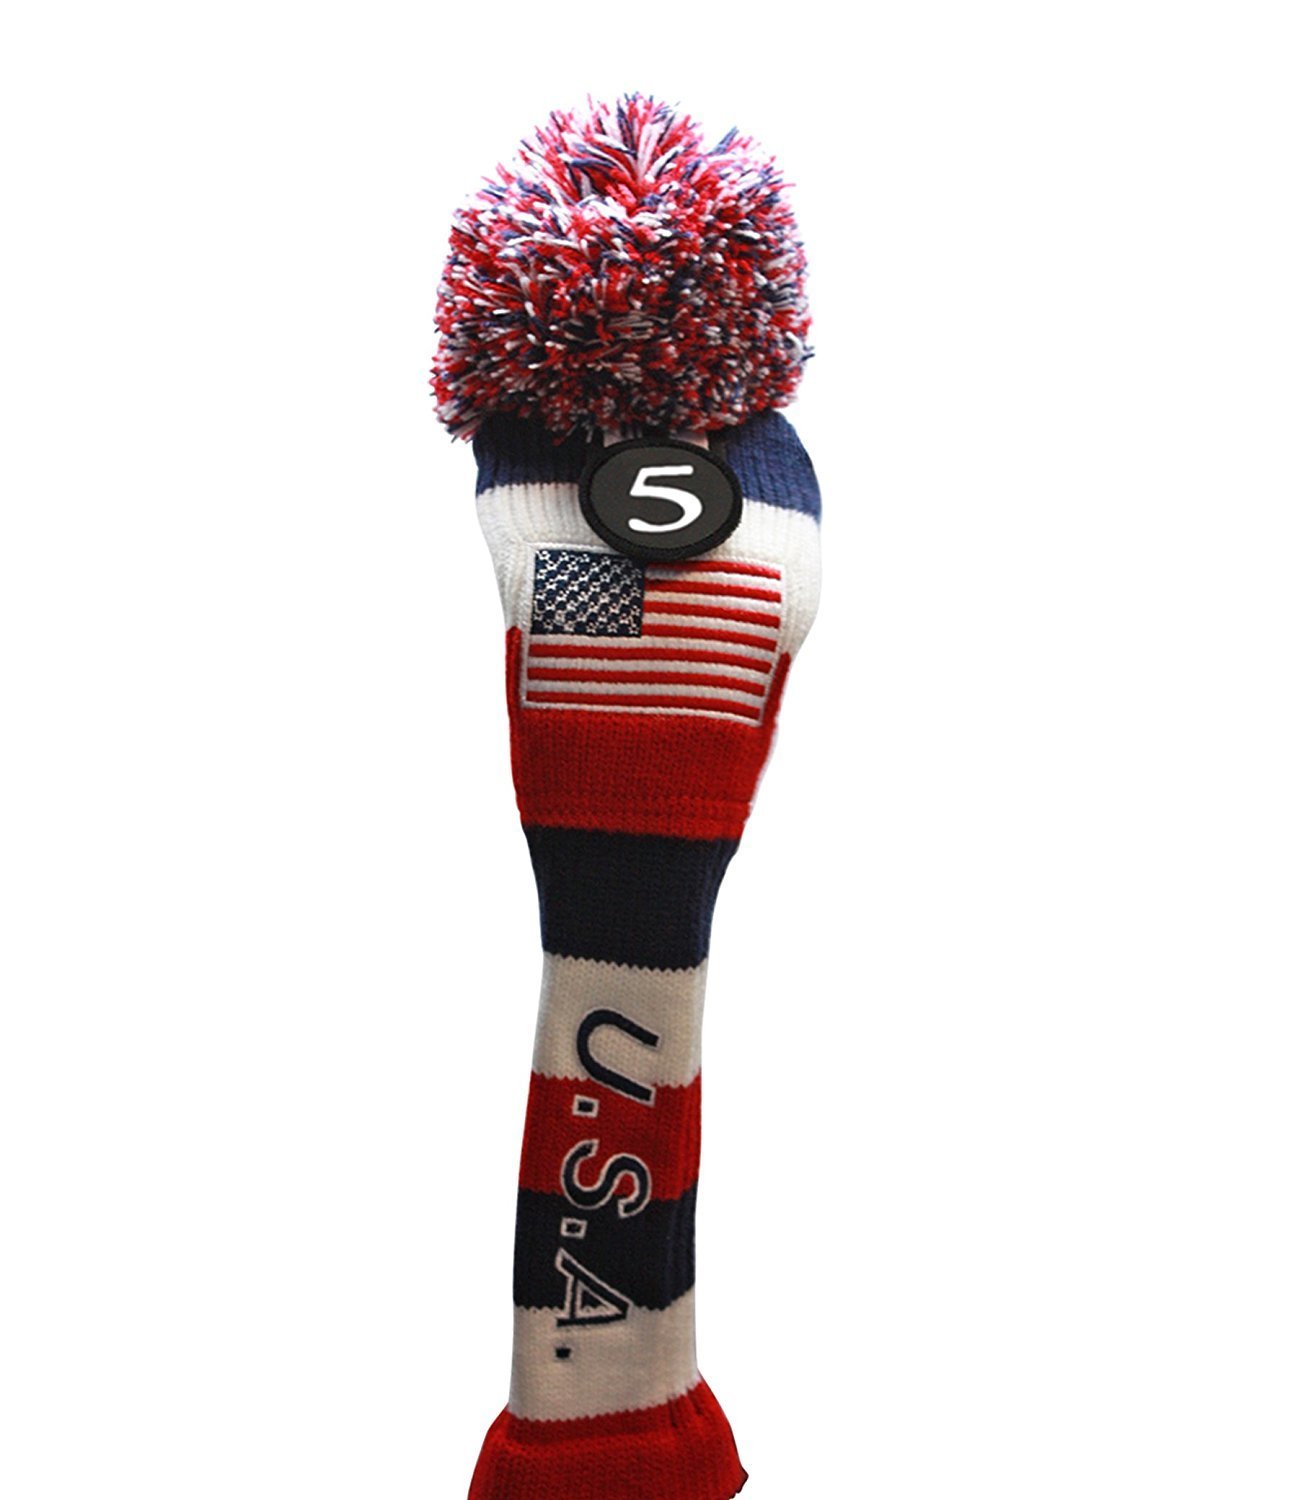 USA Majek Golf Driver 1 3 5 7 Fairway Woods Headcovers Pom Pom Knit Limited Edition Vintage Classic Traditional Flag Stars Red White Blue Stripes Retro Head Cover Fits 460cc Drivers and 260cc Woods - image 4 of 8